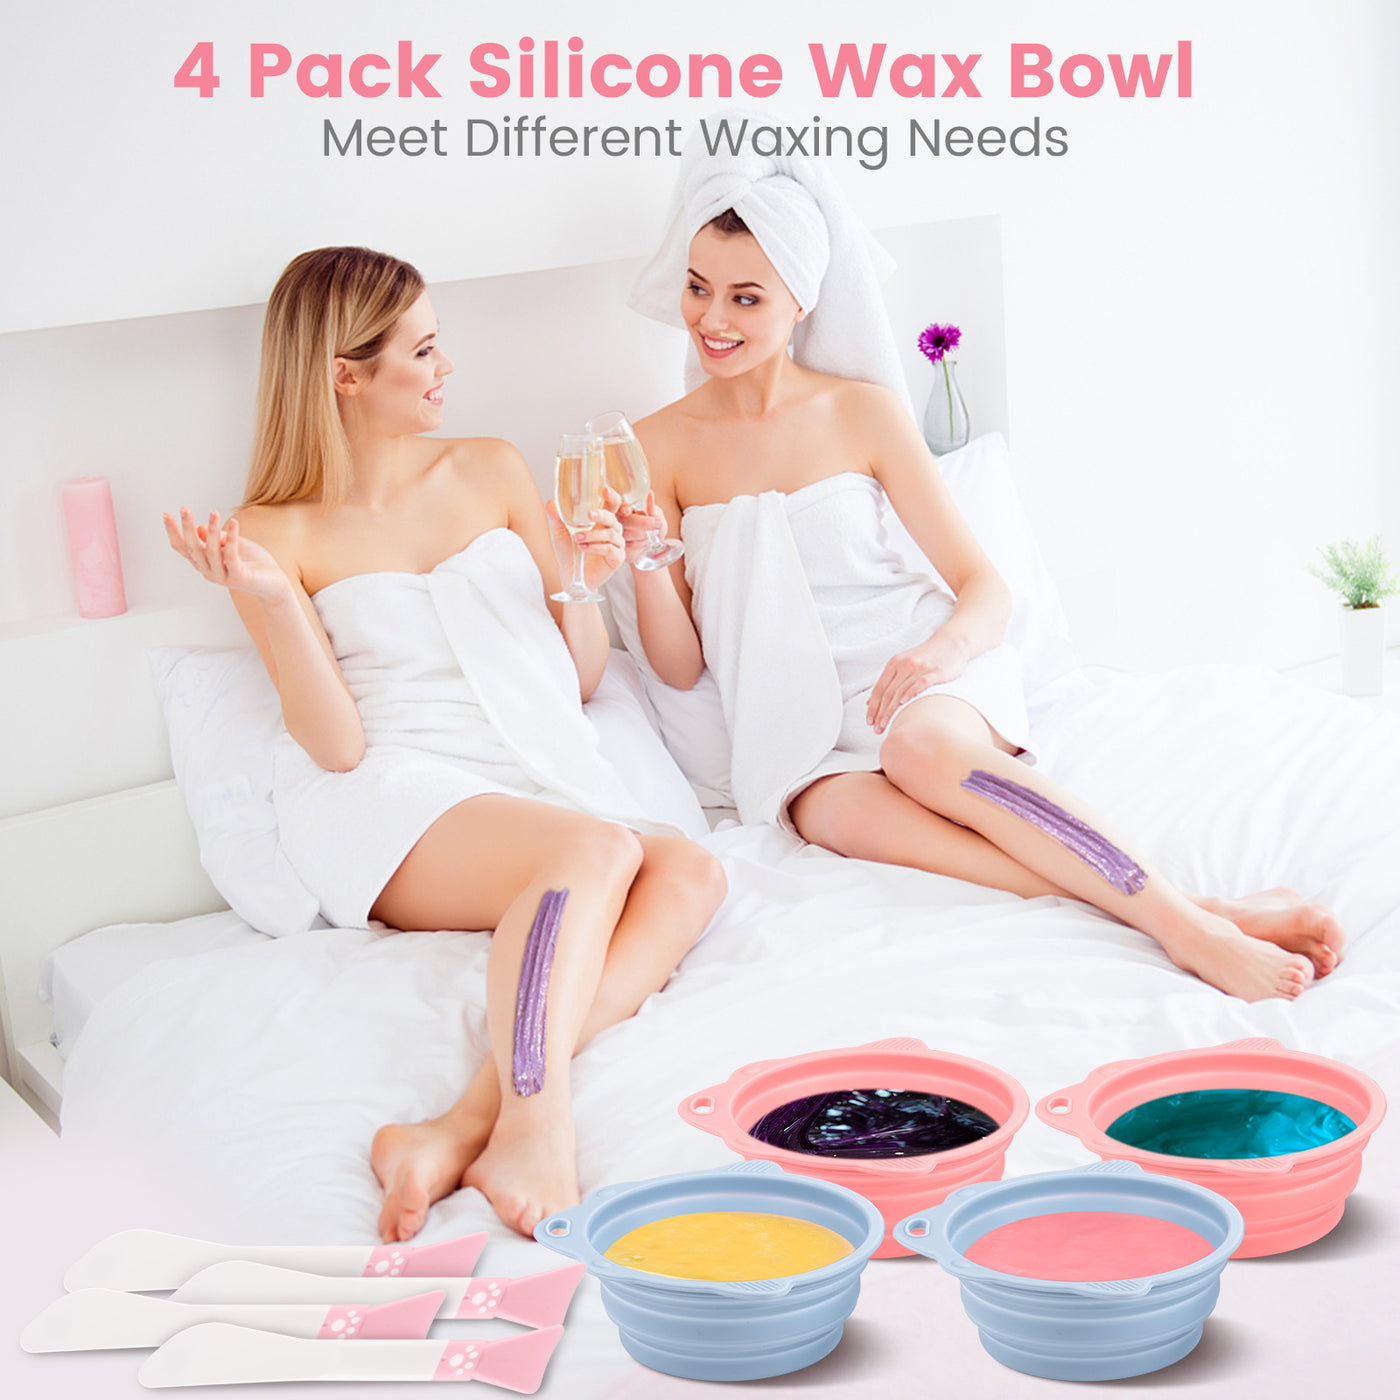 4 pcs wax melter silicone bowl silicone containers for wax hair removal  waxing bowl wax bowl silicone wax warmper pot Bowl For Home Use Wax Machine  